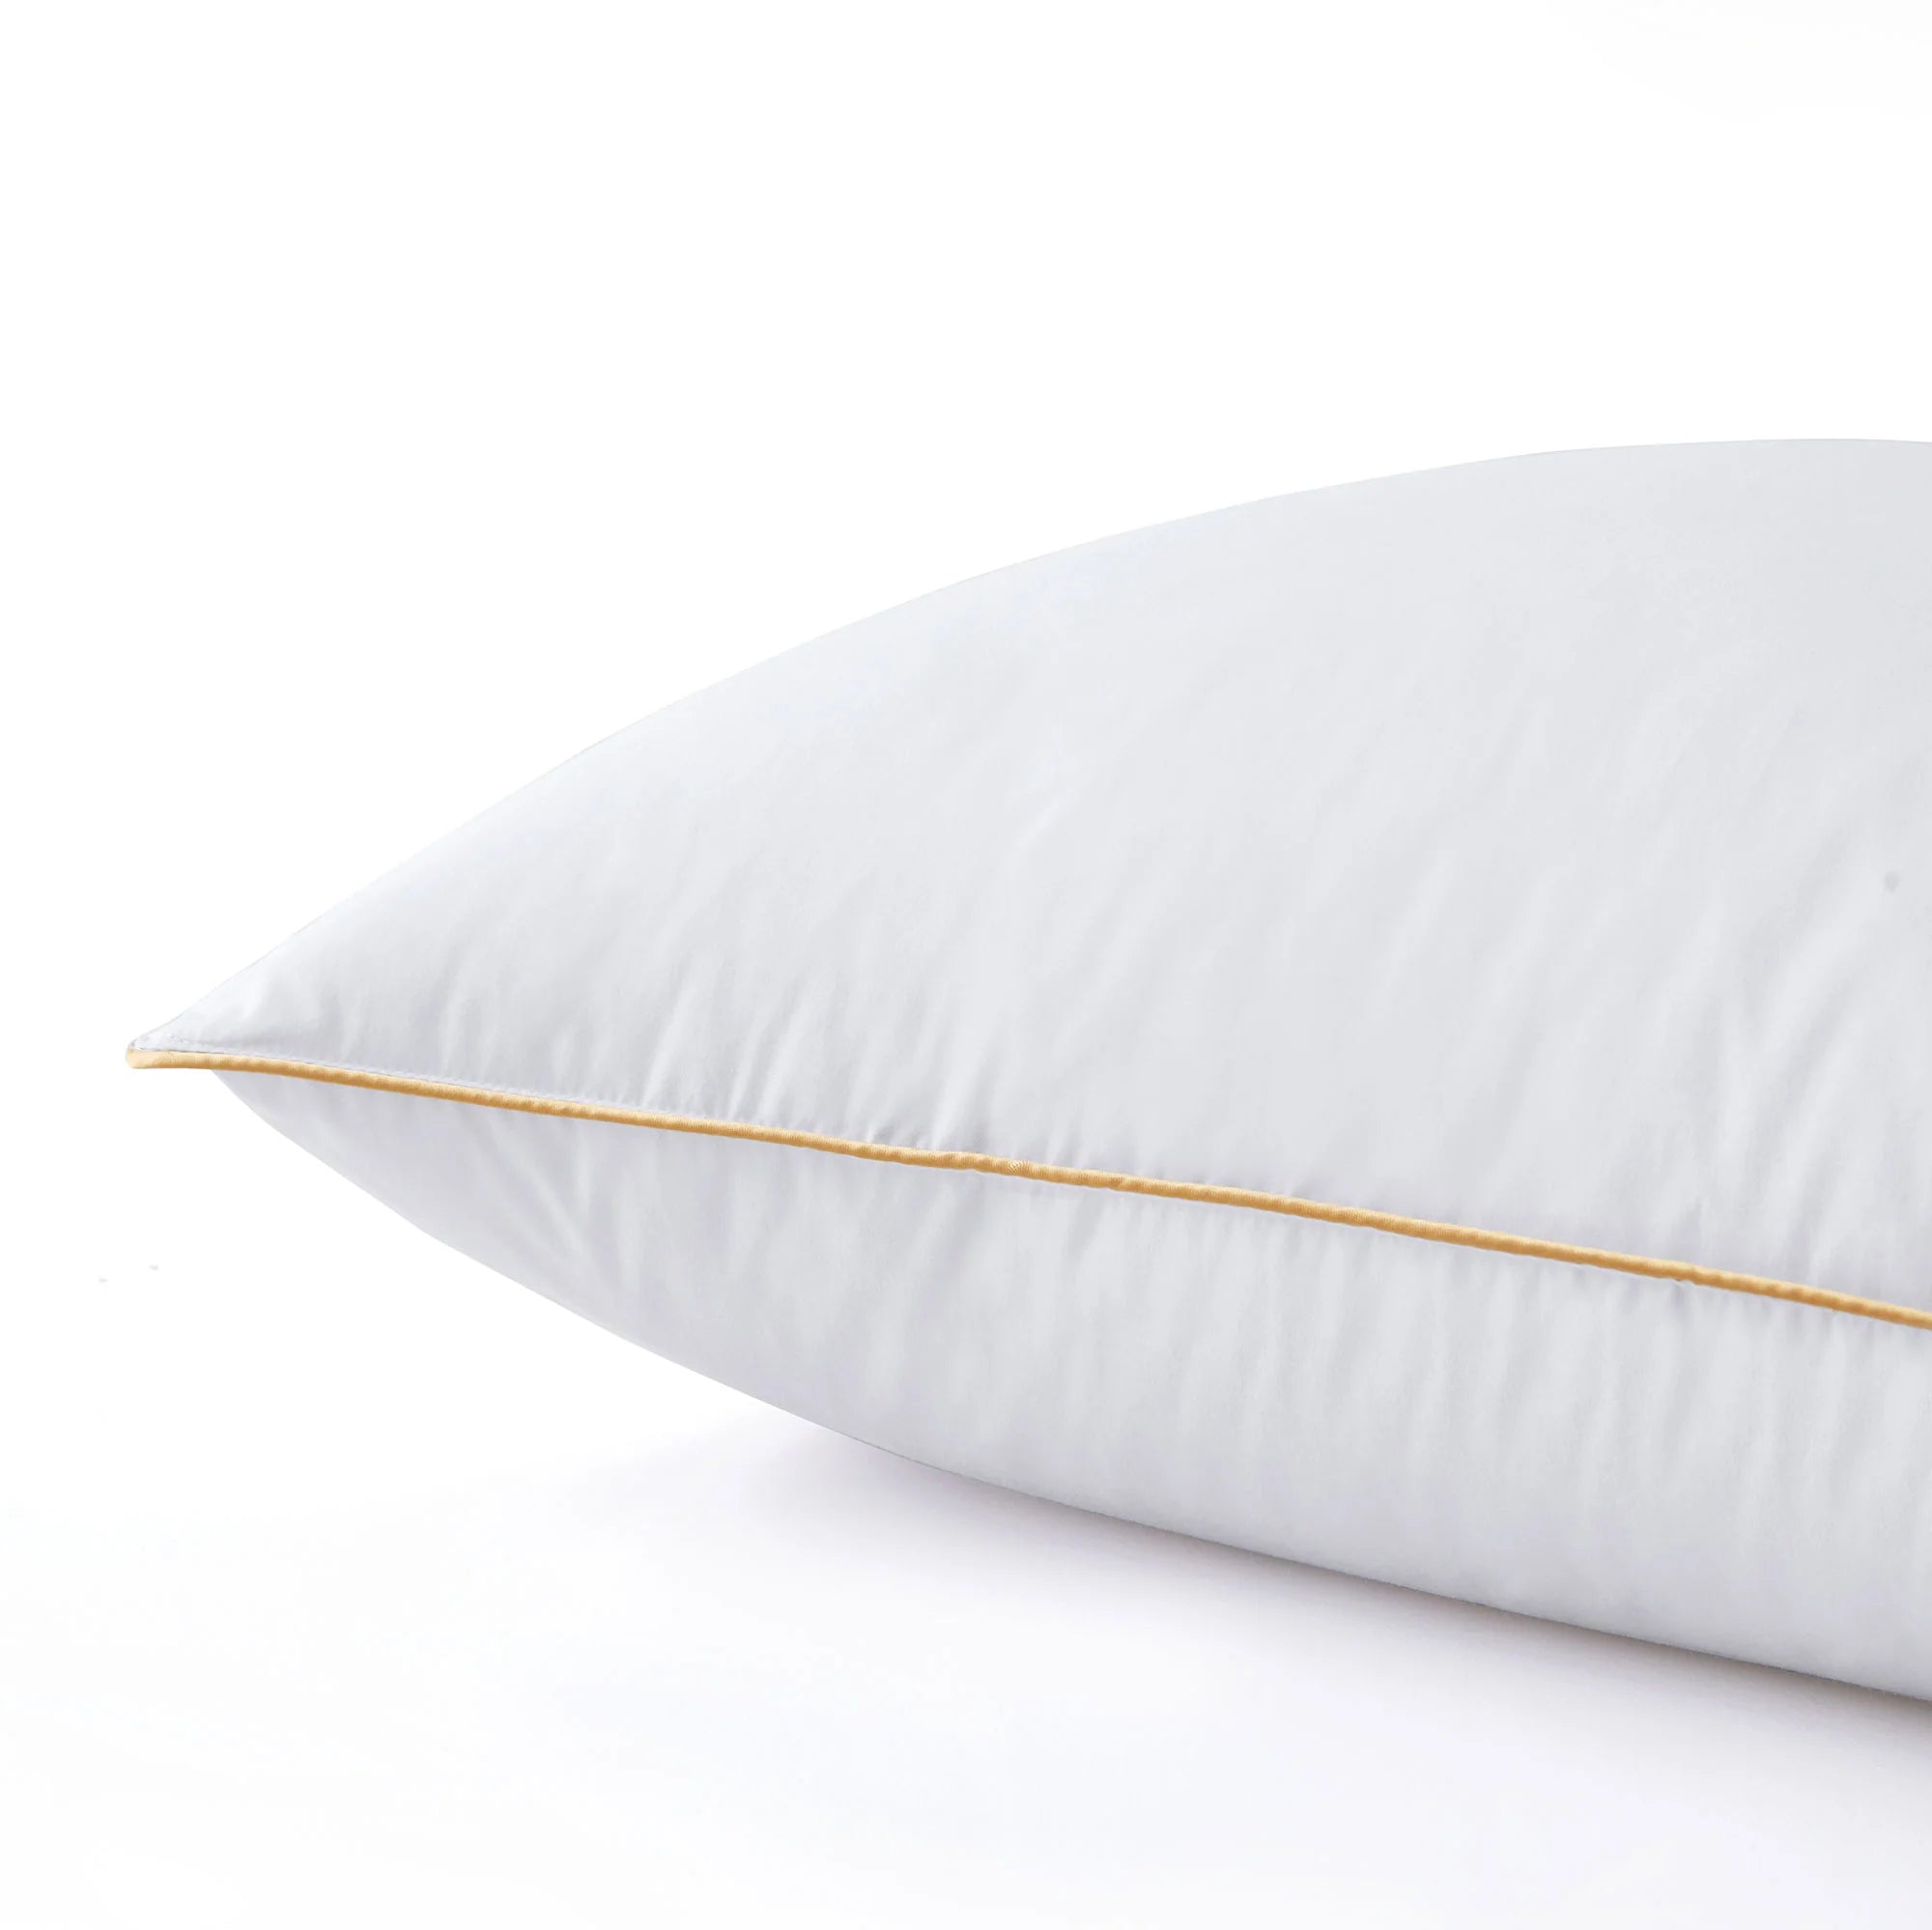 Pillow Down-Feather with Downproof Cotton Shell 300 Thread Count